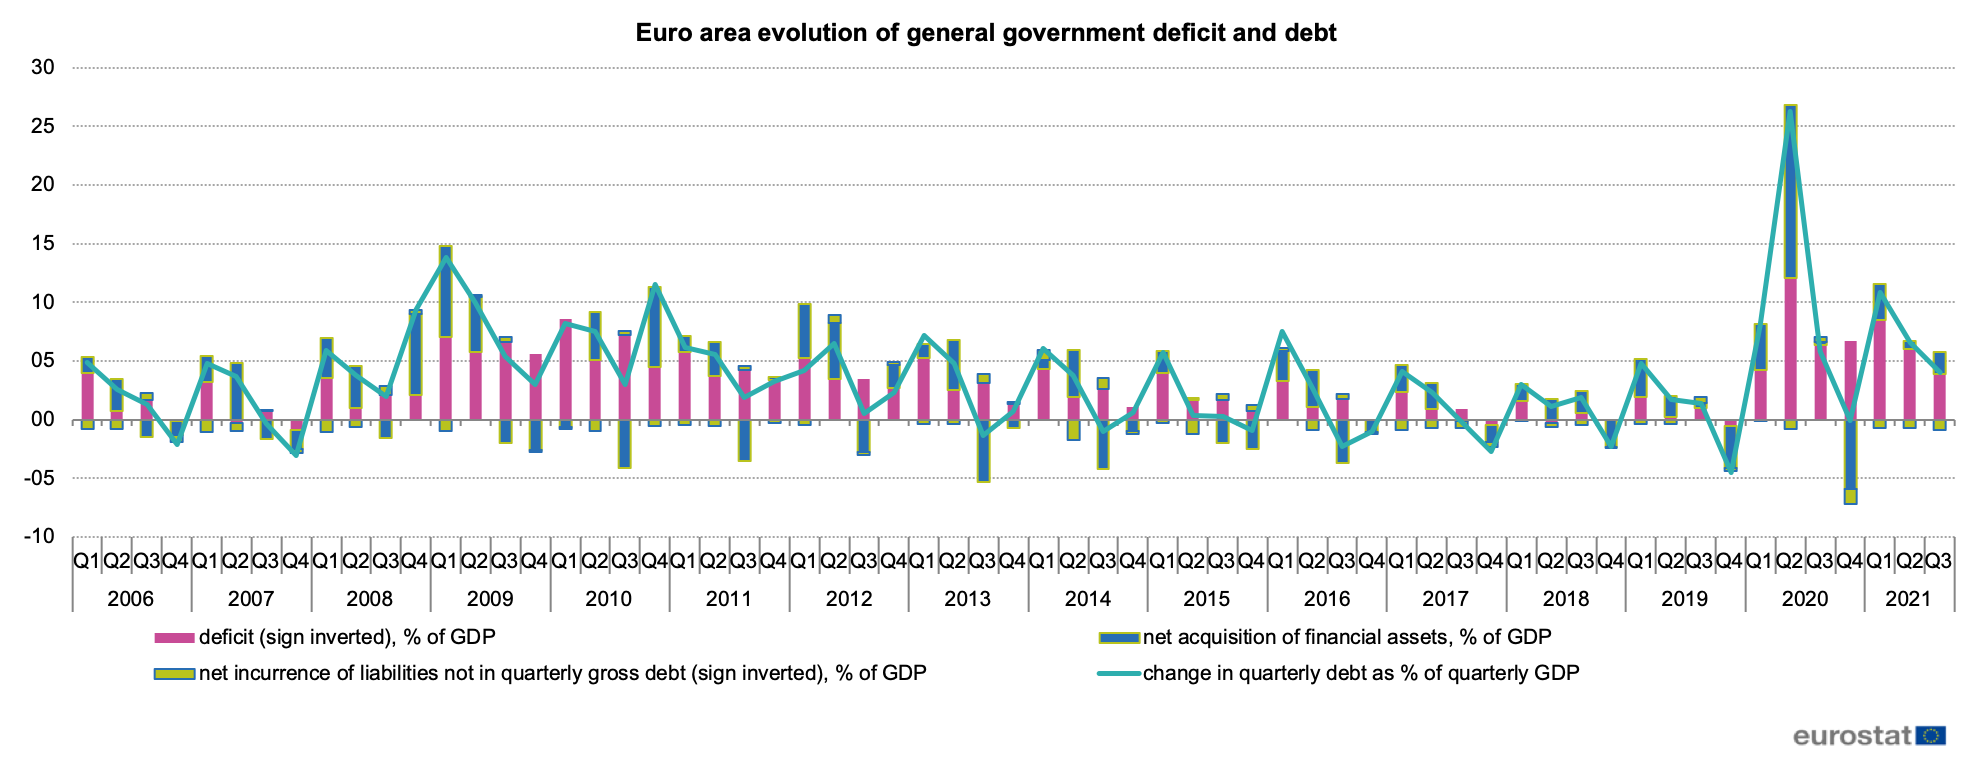 Evolution of general government deficit and debit in the Euro area, (quarterly) 2006-2021